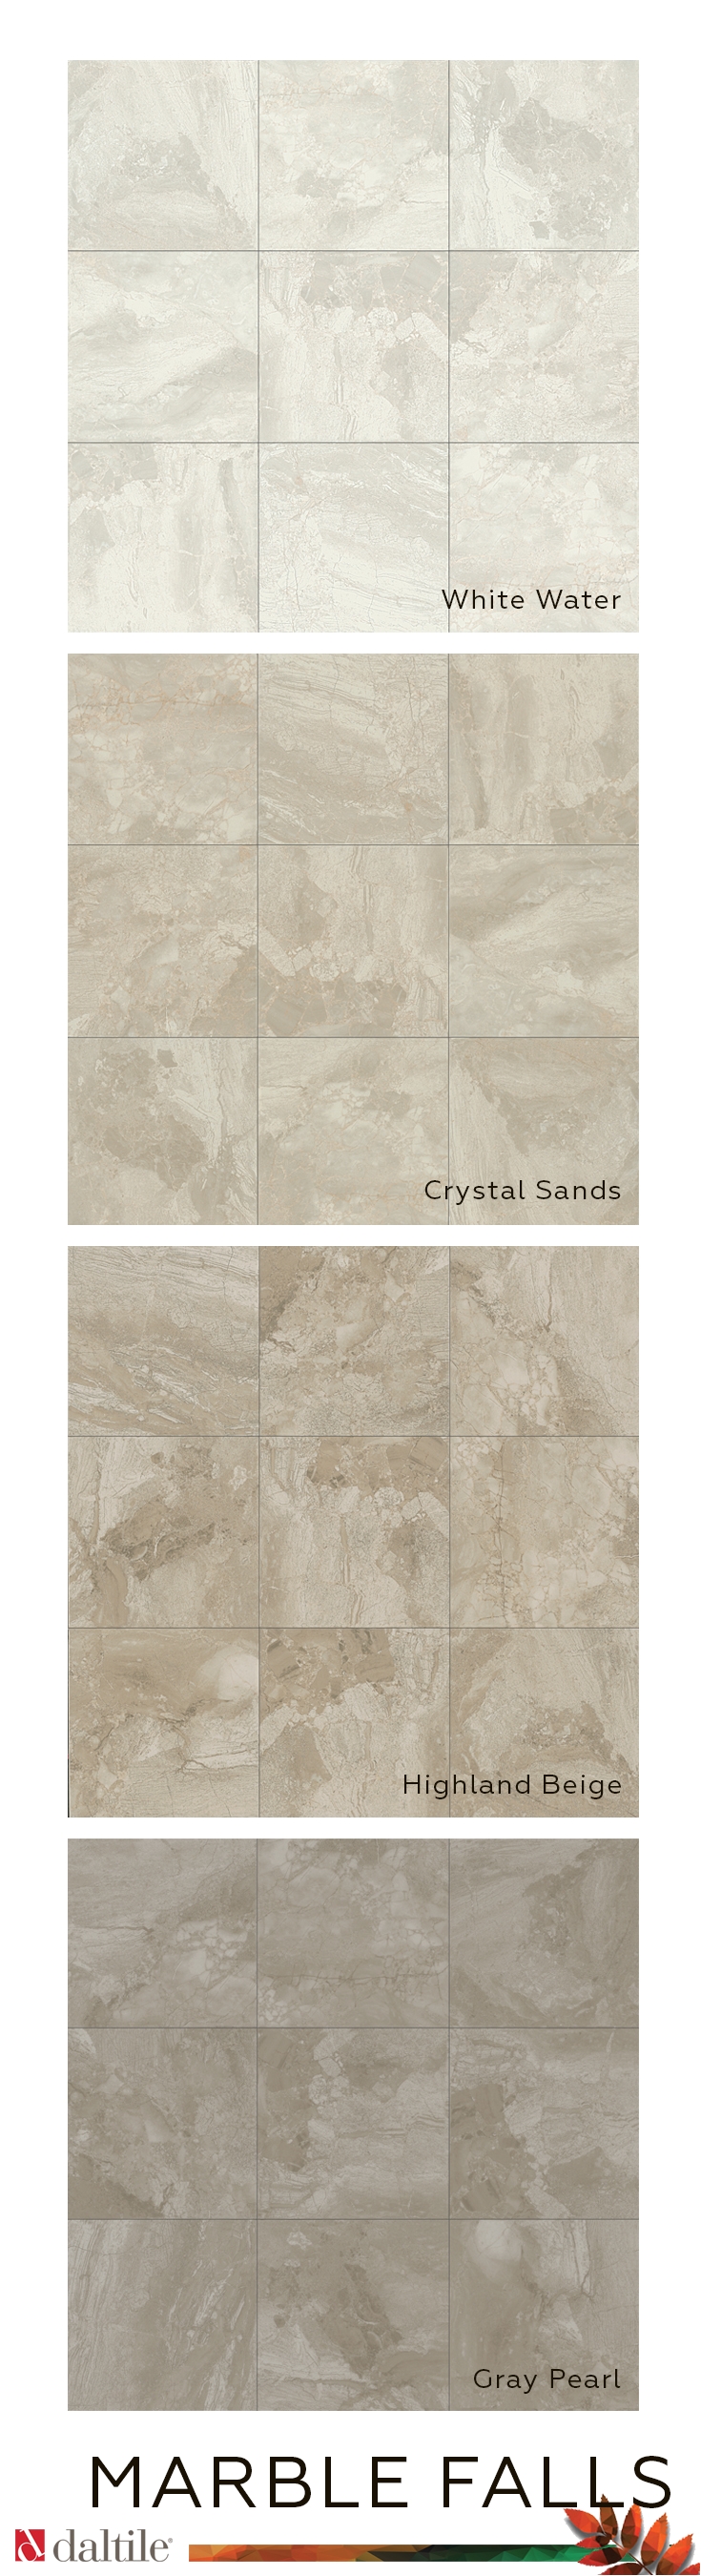 the classic elegance of marble falls glazed ceramic tile rivals the exquisite details found in nature